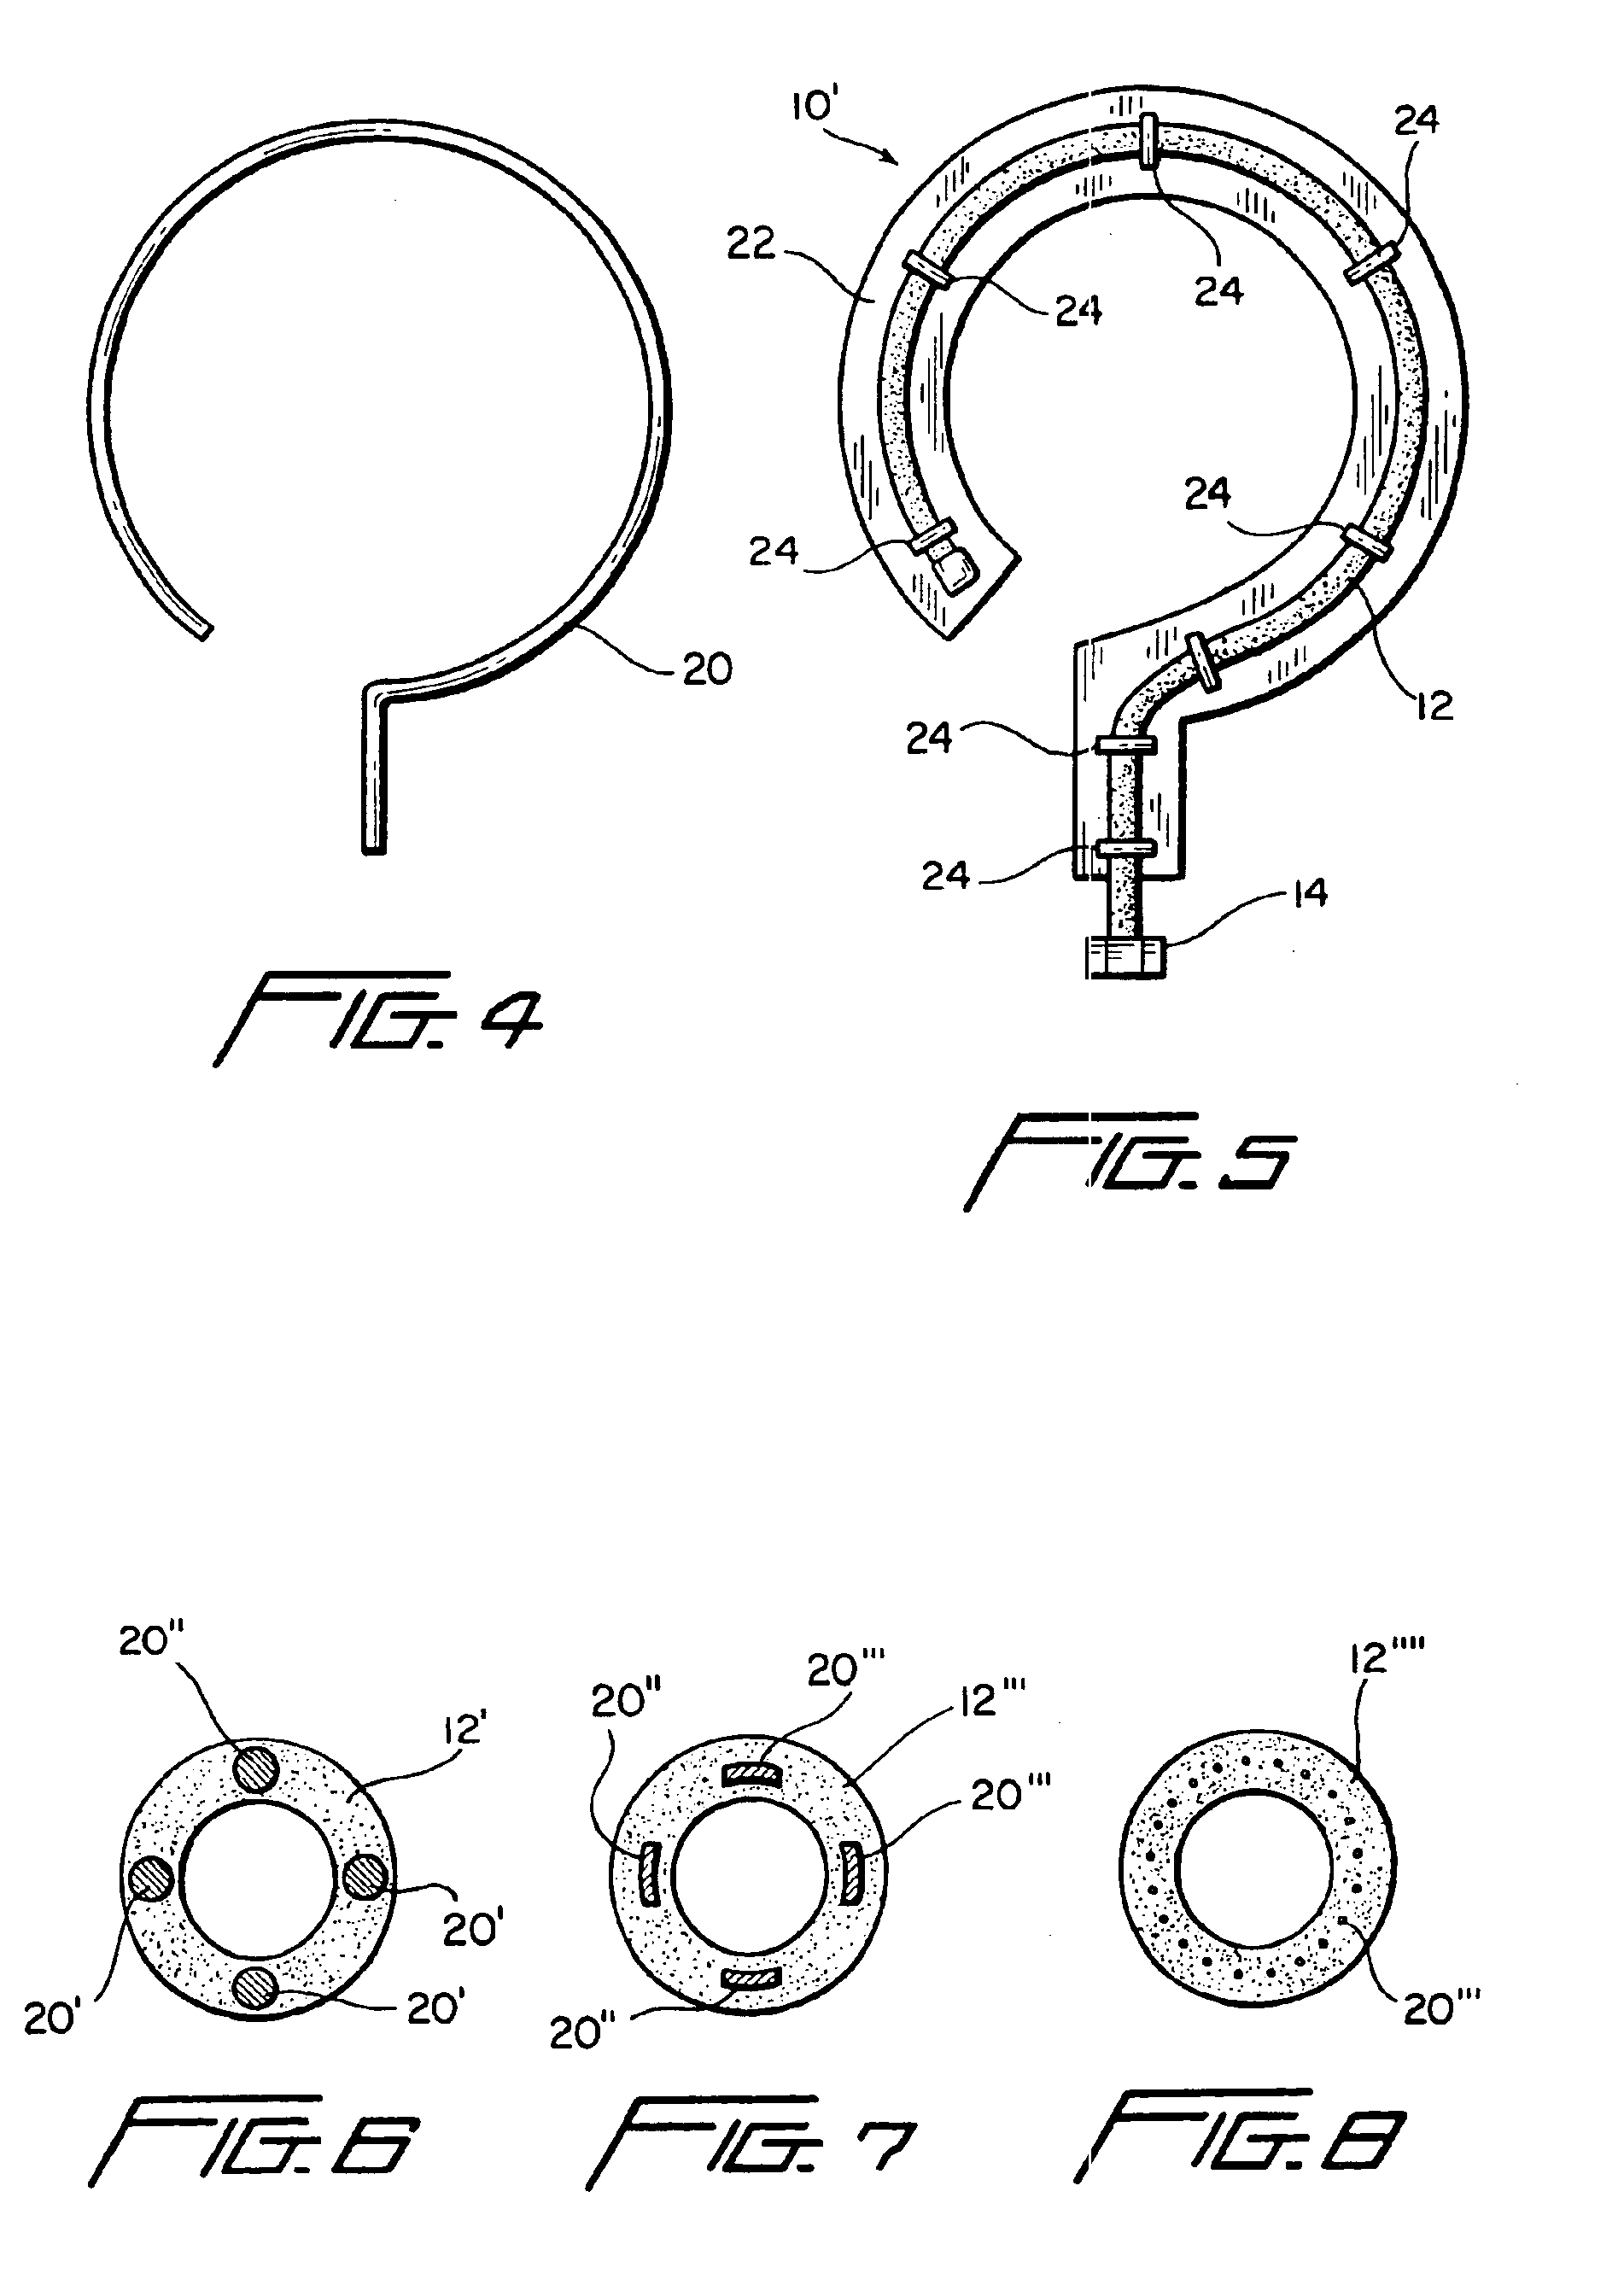 Irrigation device and system